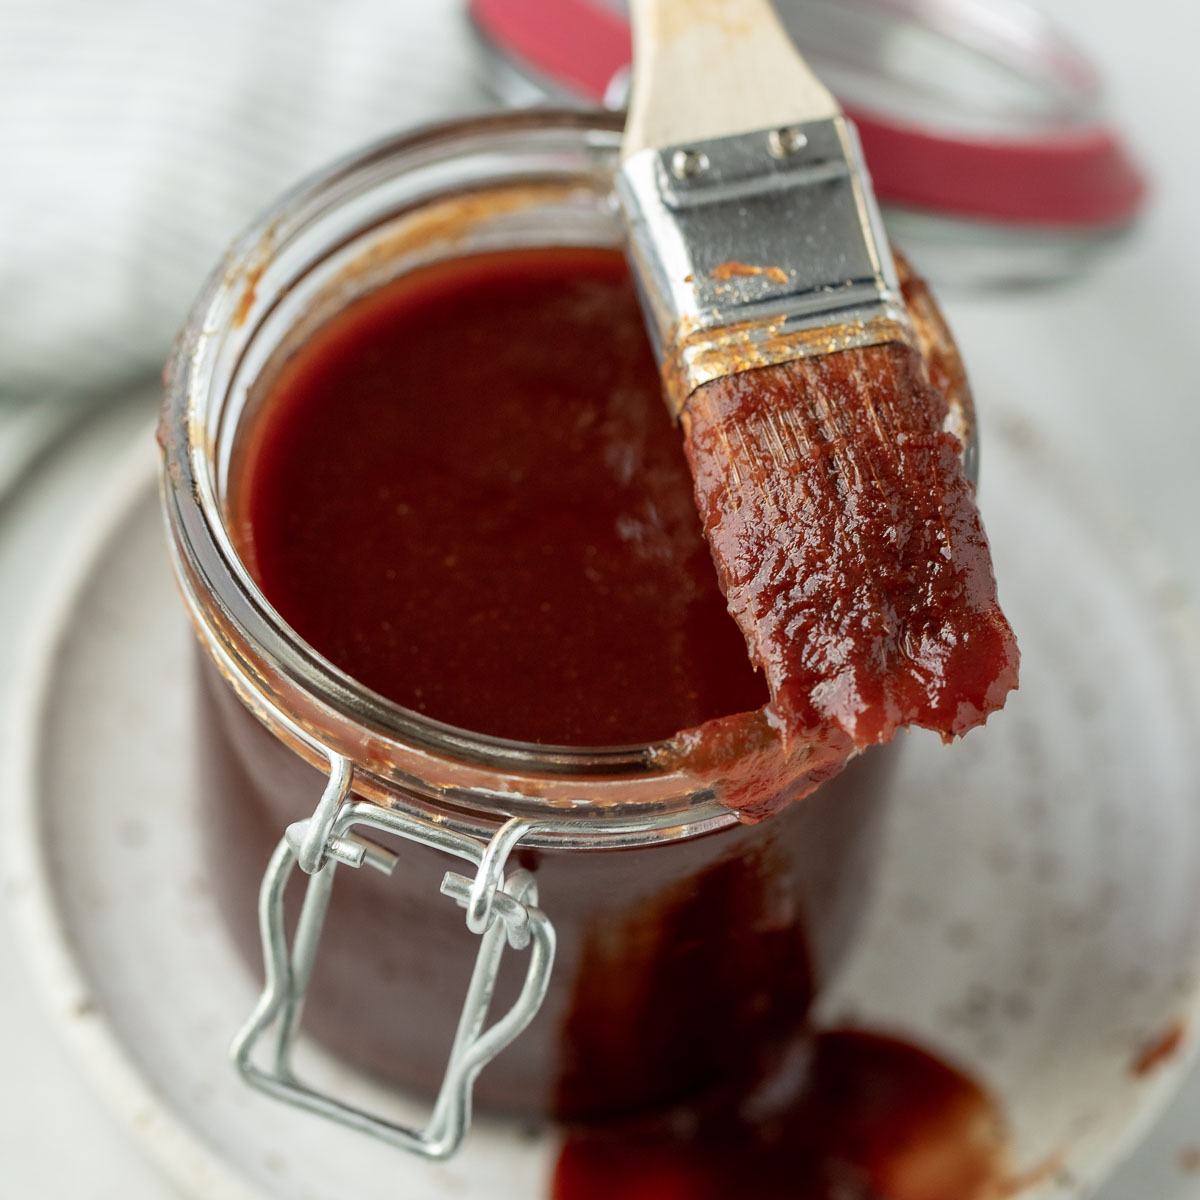 A basting brush covered in sauce resting on top a glass jar.